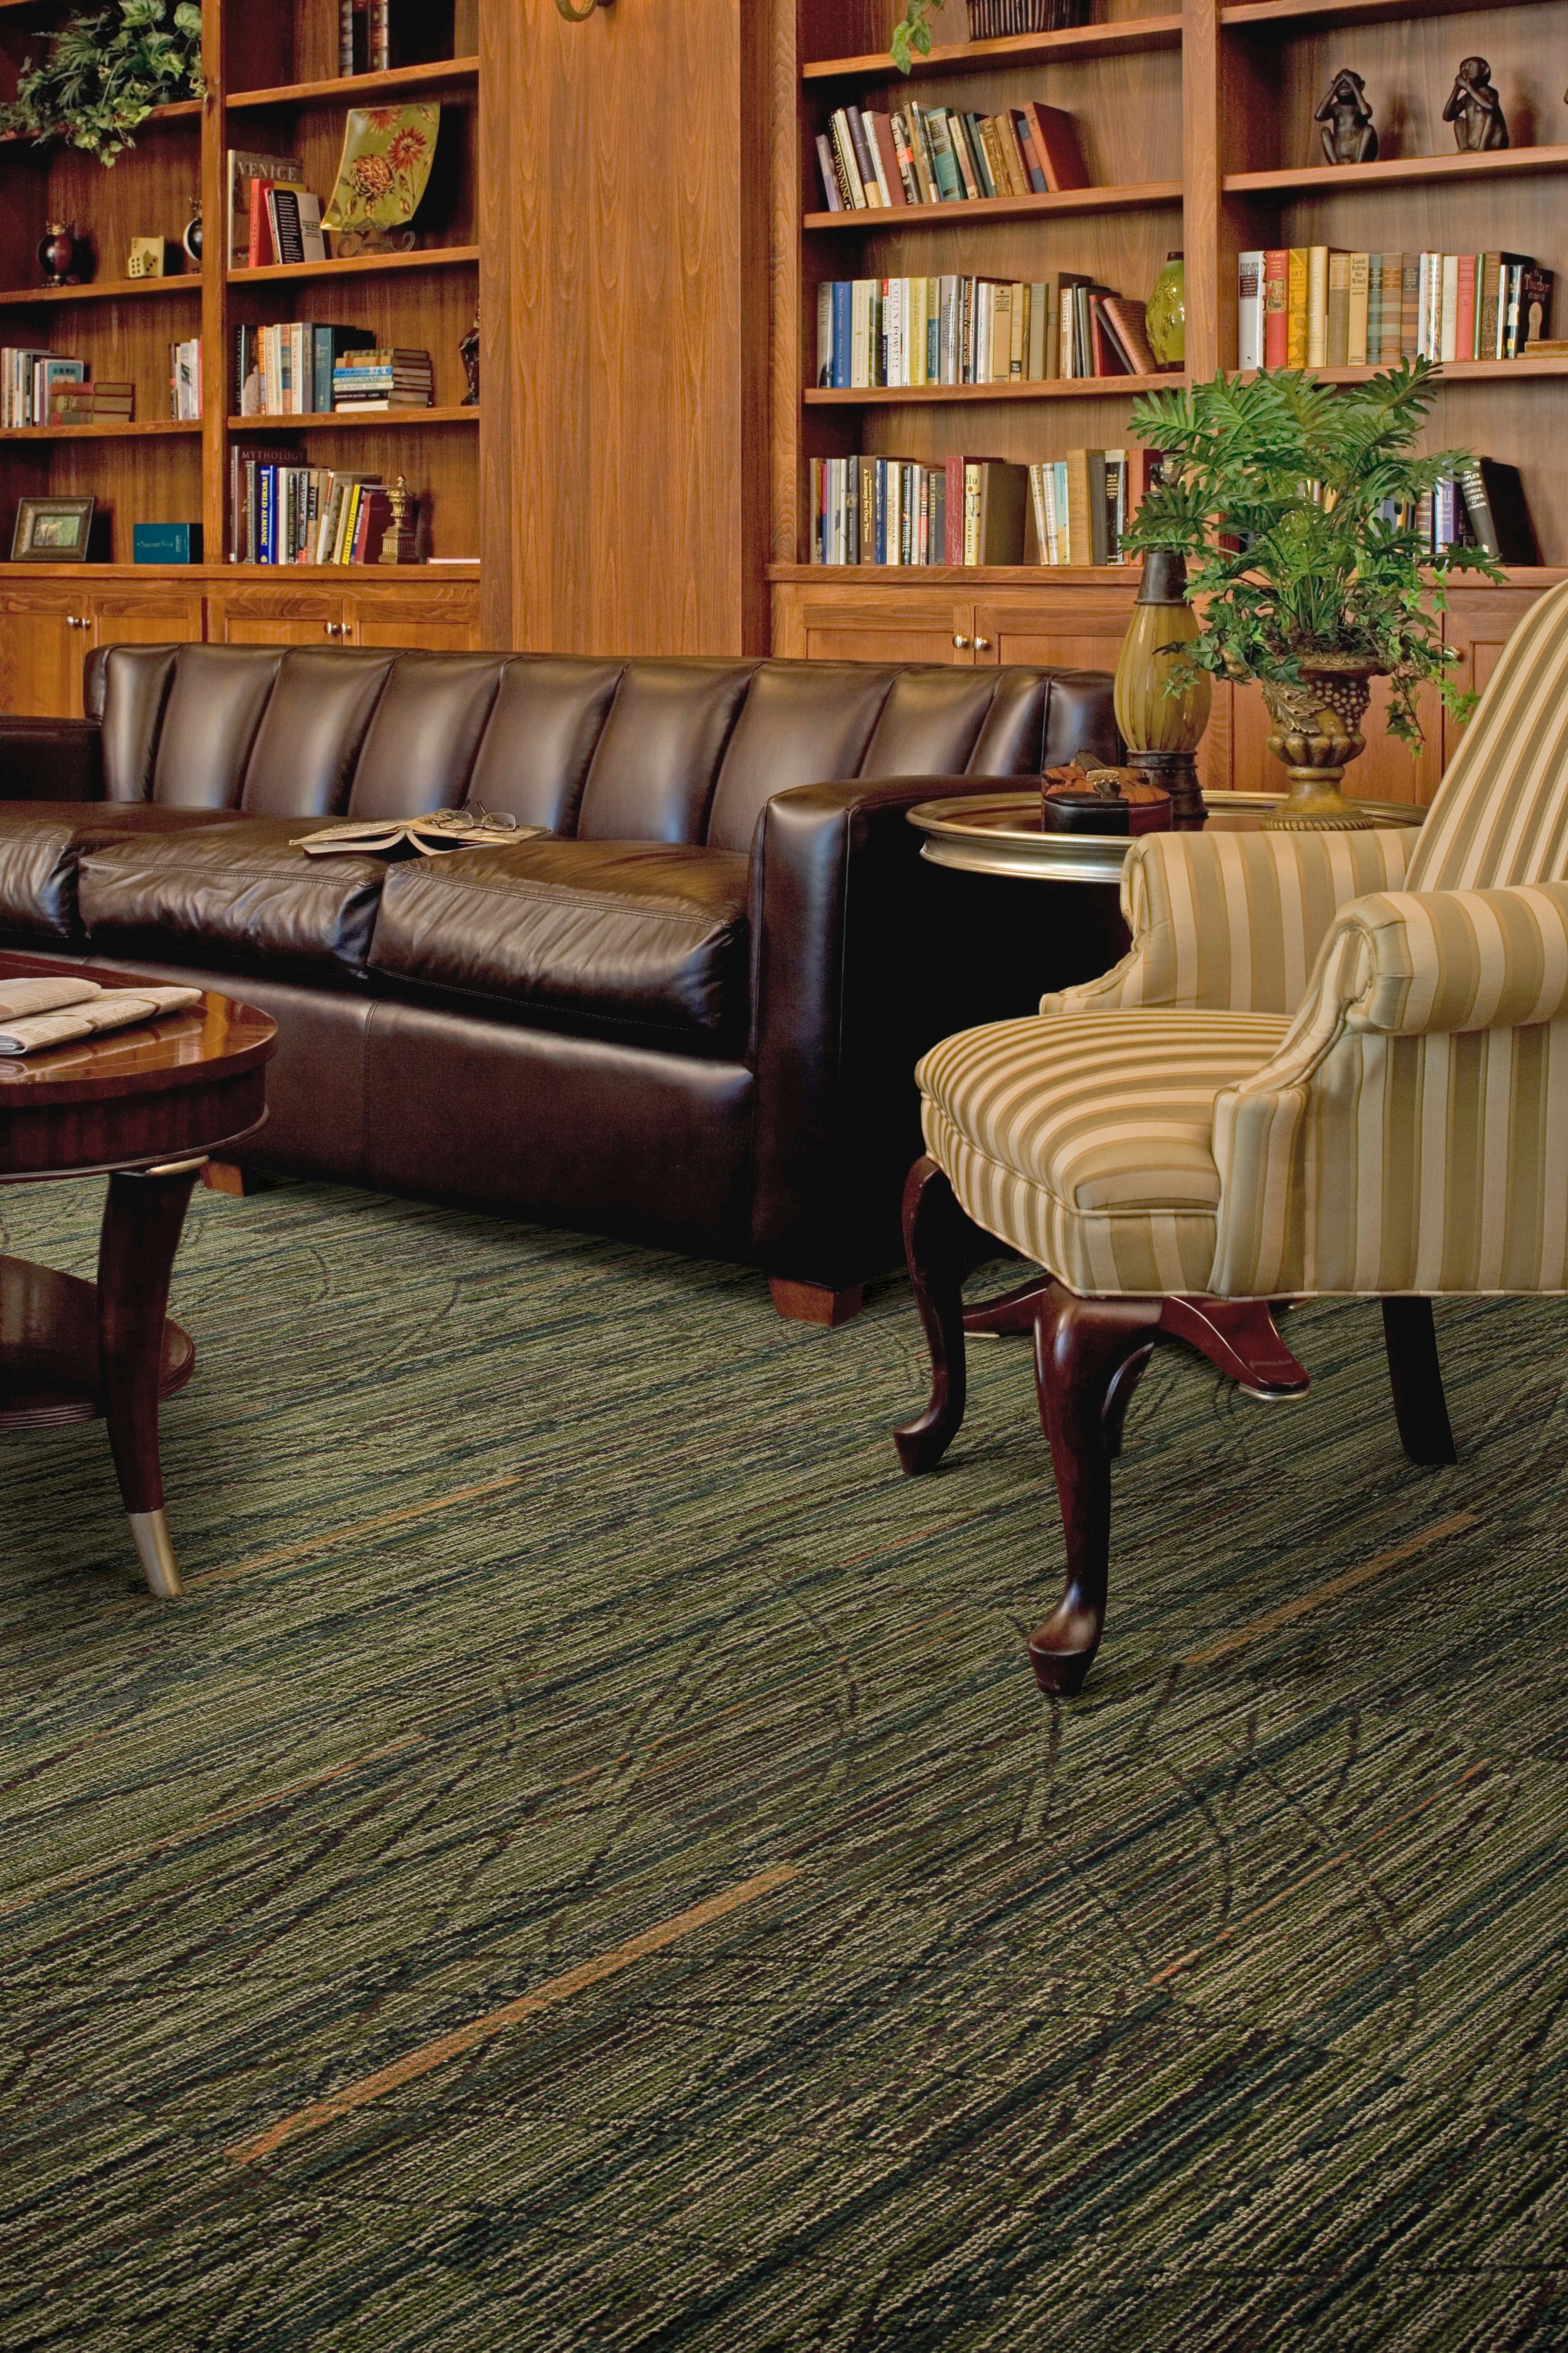 Interface Prairie Grass carpet tile in senior housing seating area with leather sofa and bookshelves image number 10